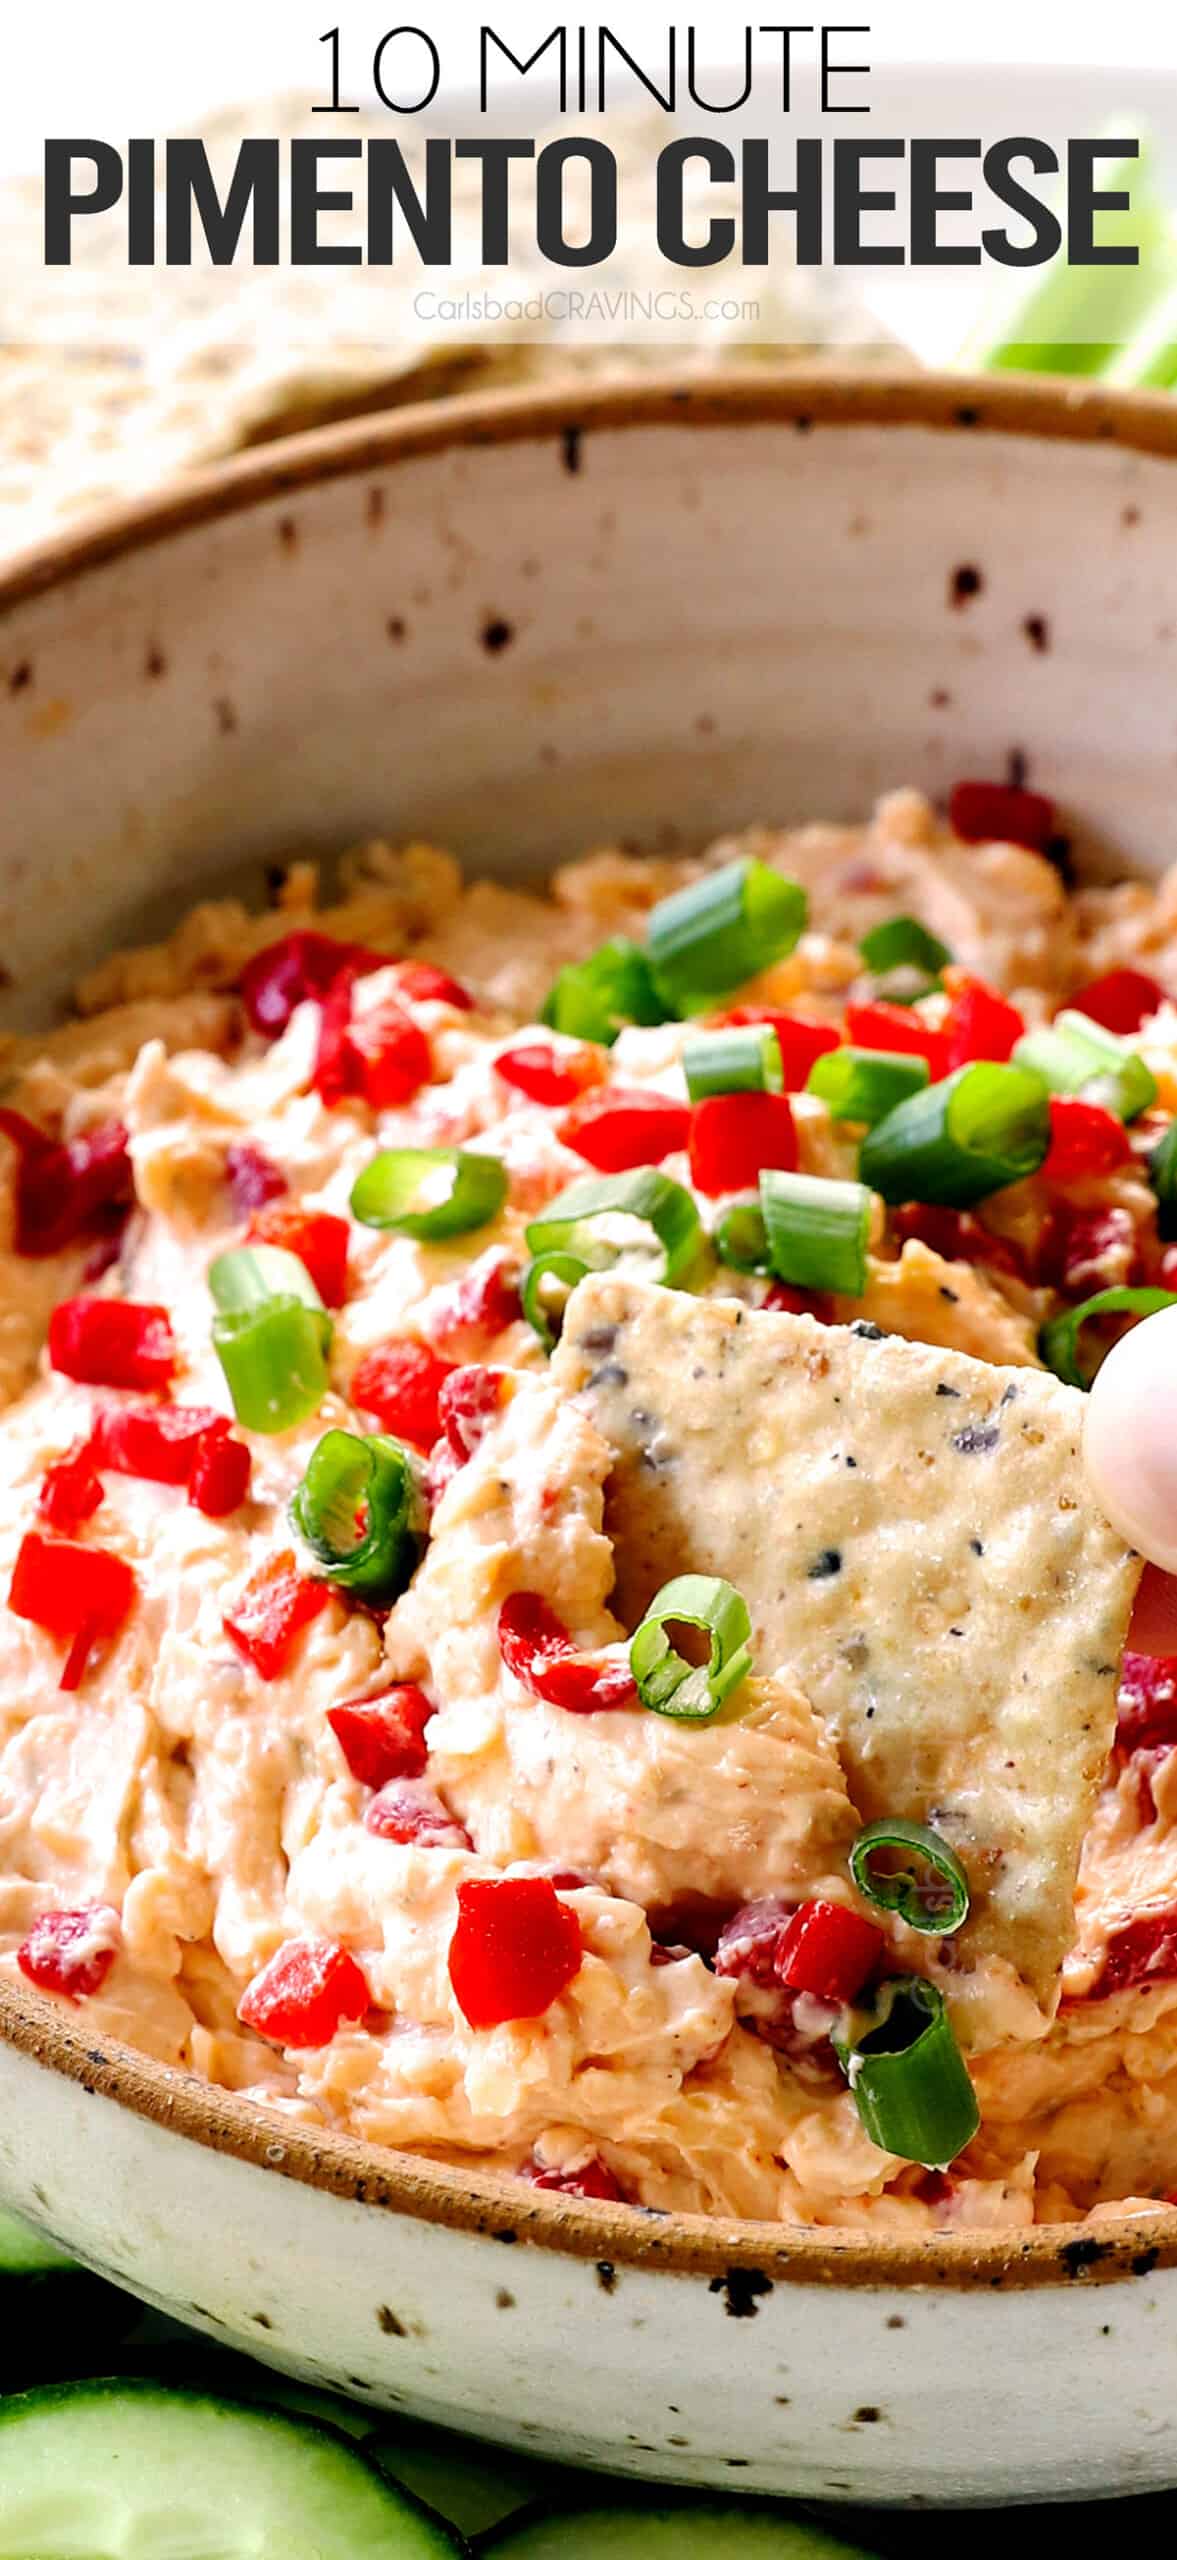 up close of pimento cheese recipe showing how rich and creamy it is